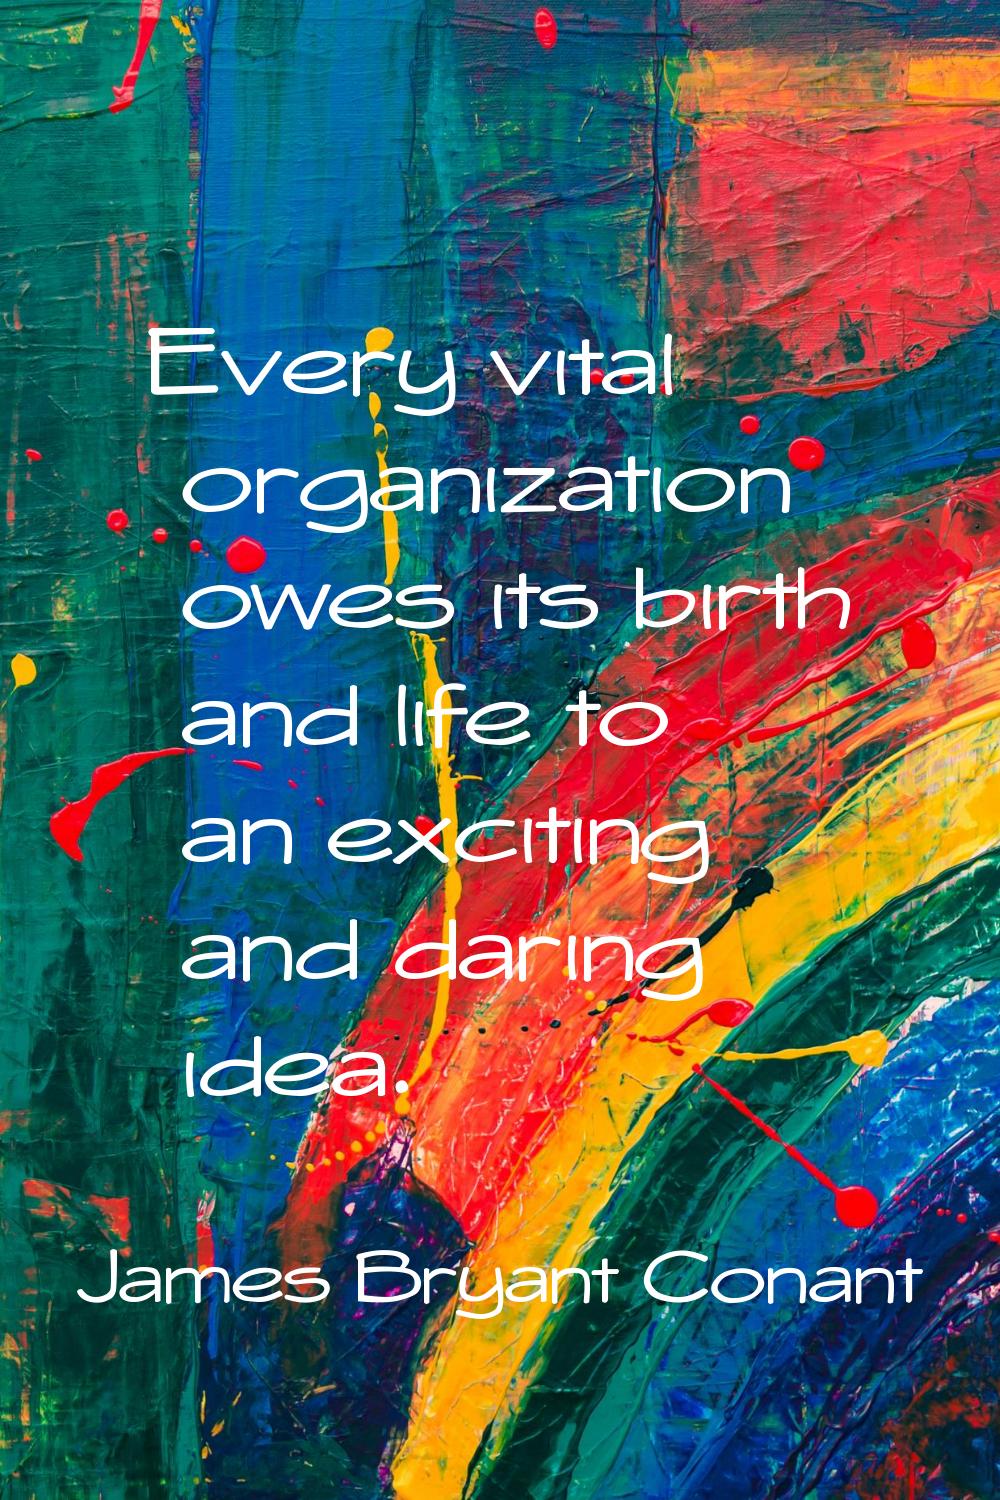 Every vital organization owes its birth and life to an exciting and daring idea.